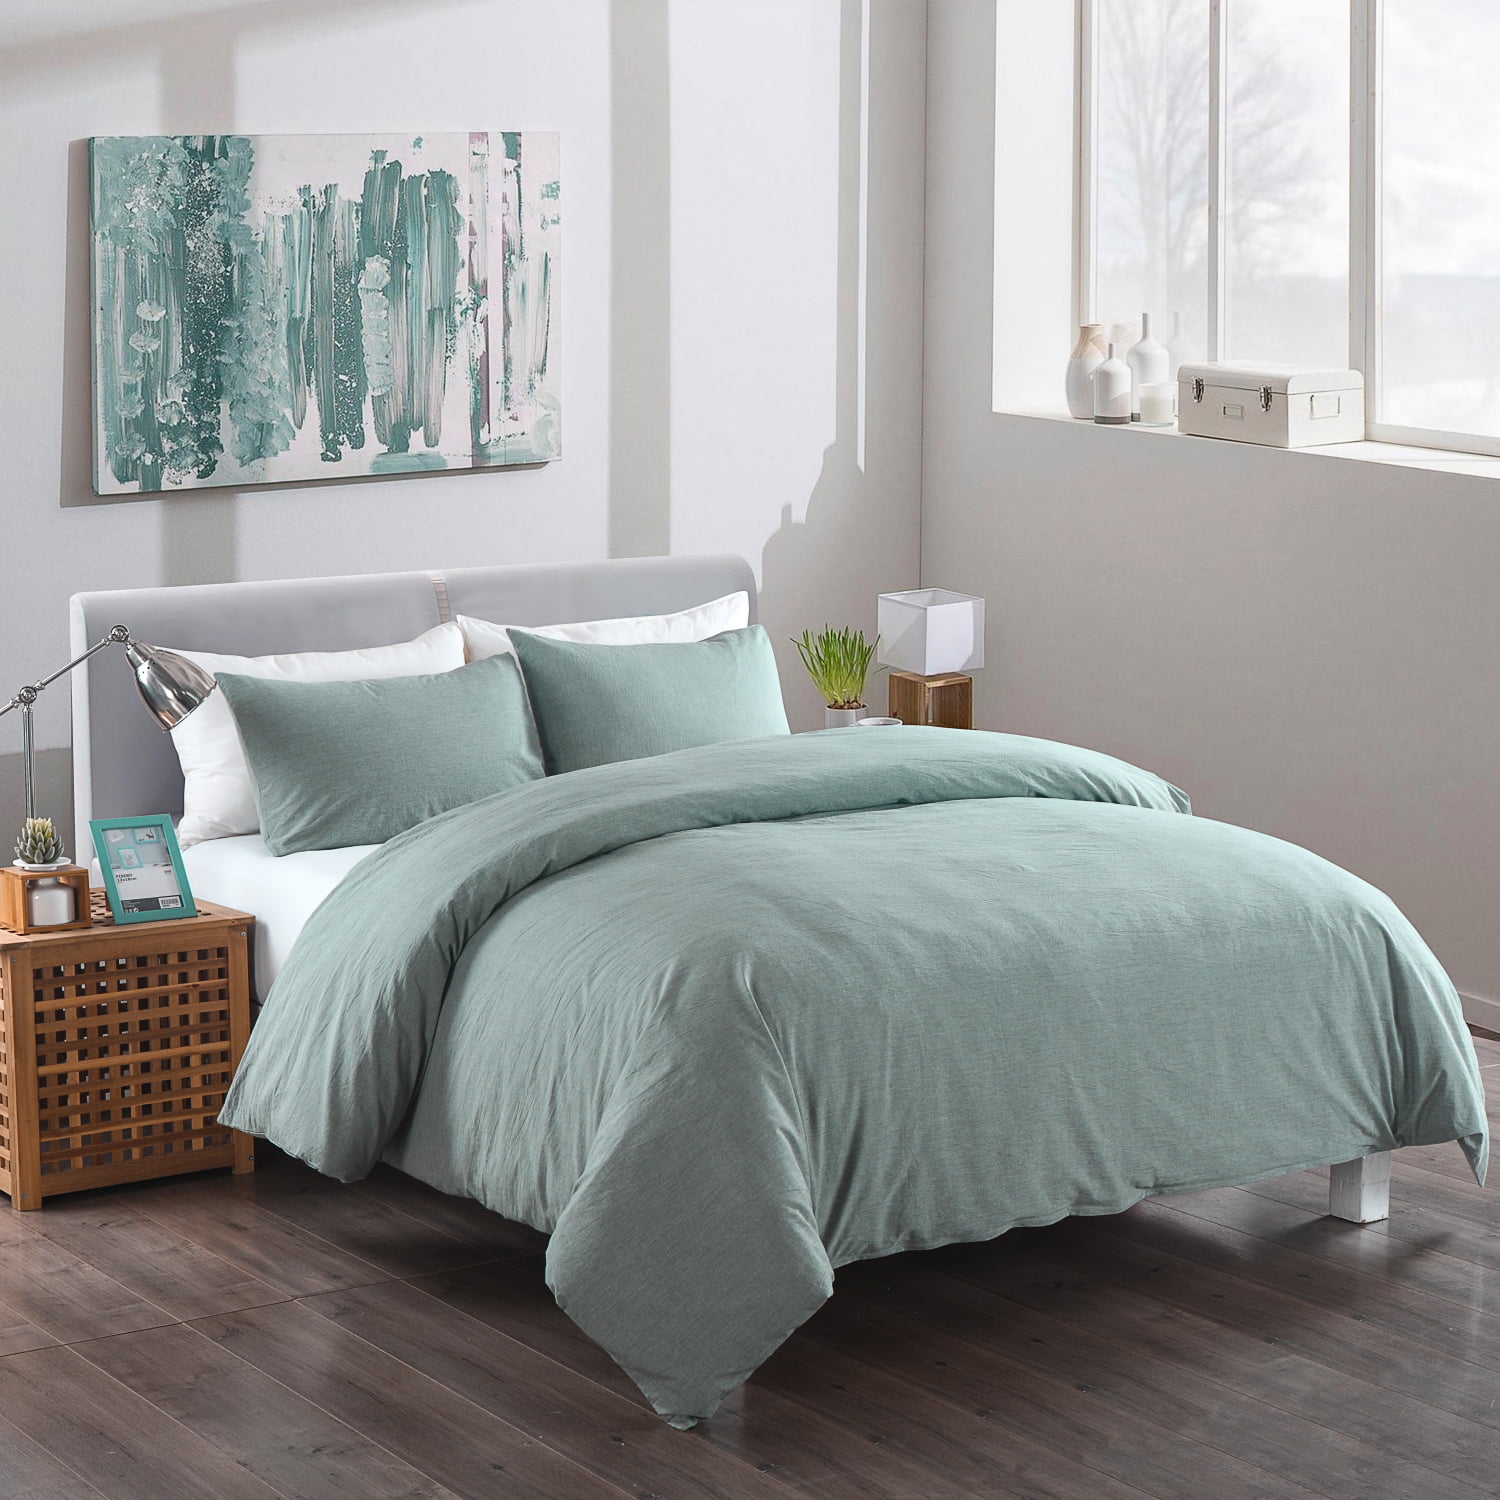 Messy Bed Washed Cotton Duvet Cover and Sham Set - Walmart.com